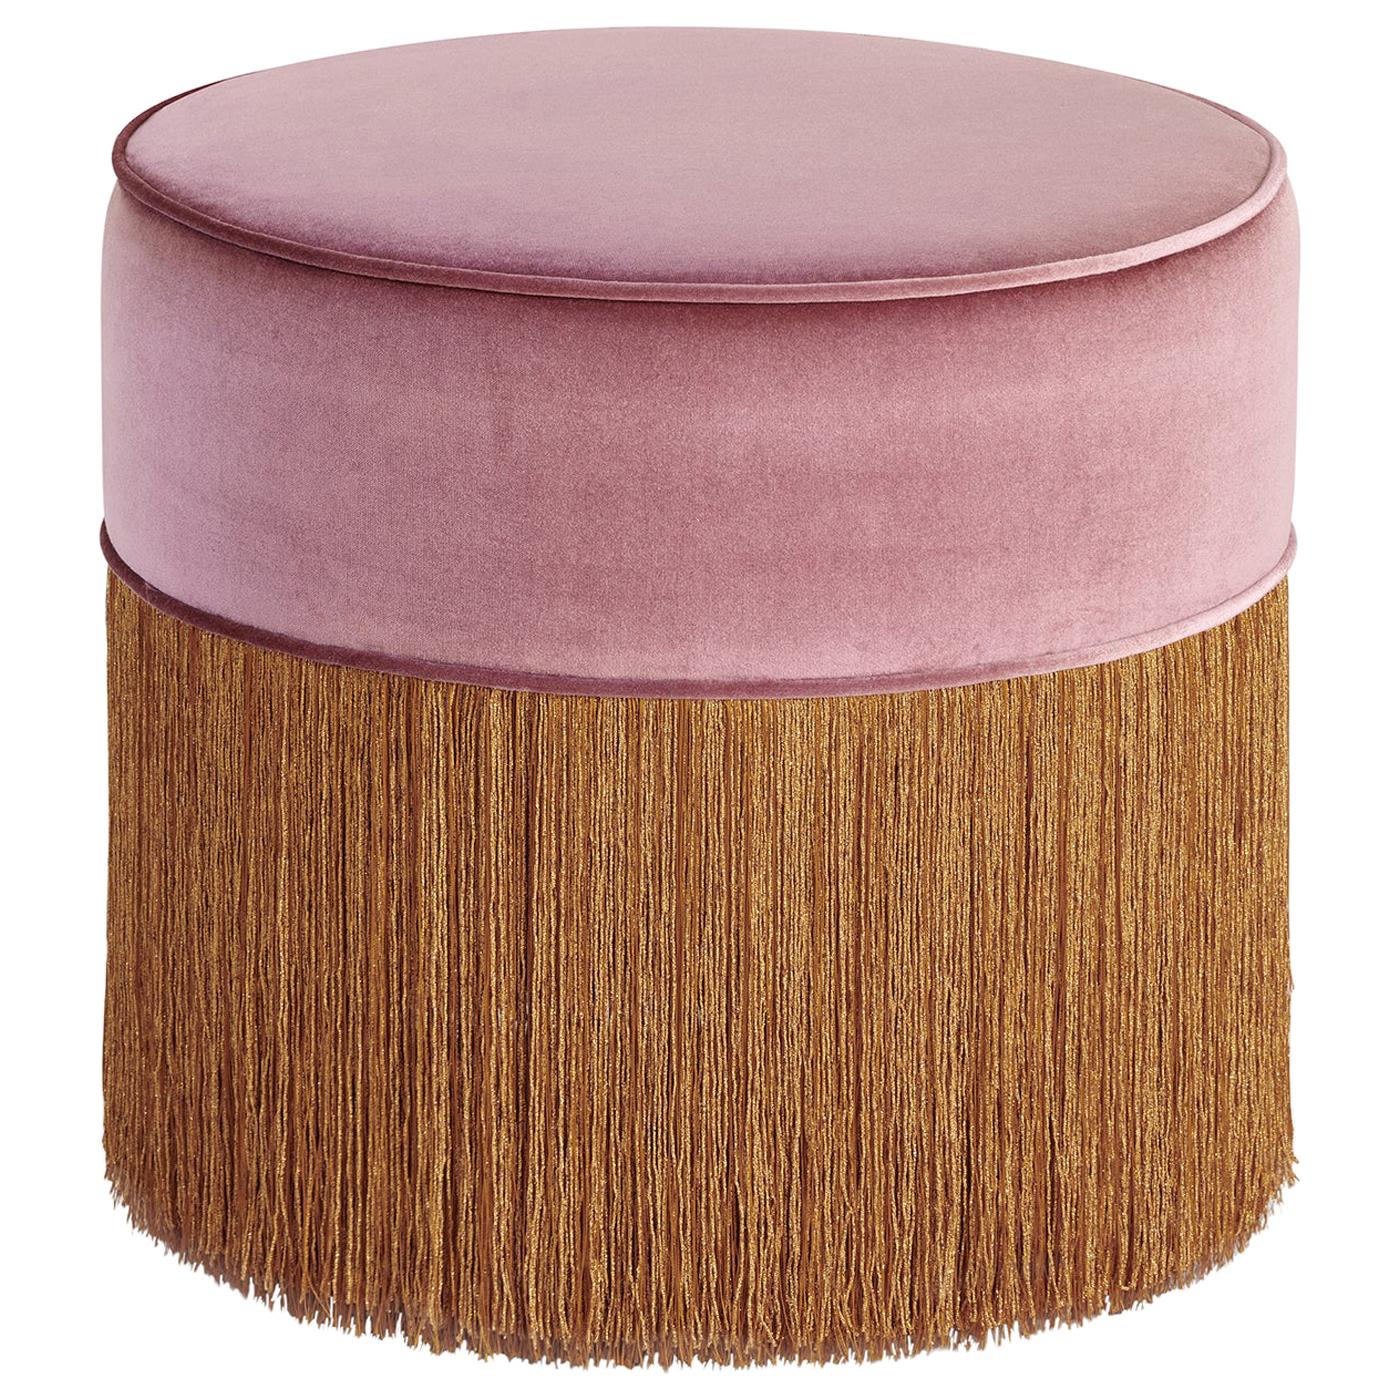 Sparkle Pink Pouf with Copper Fringe